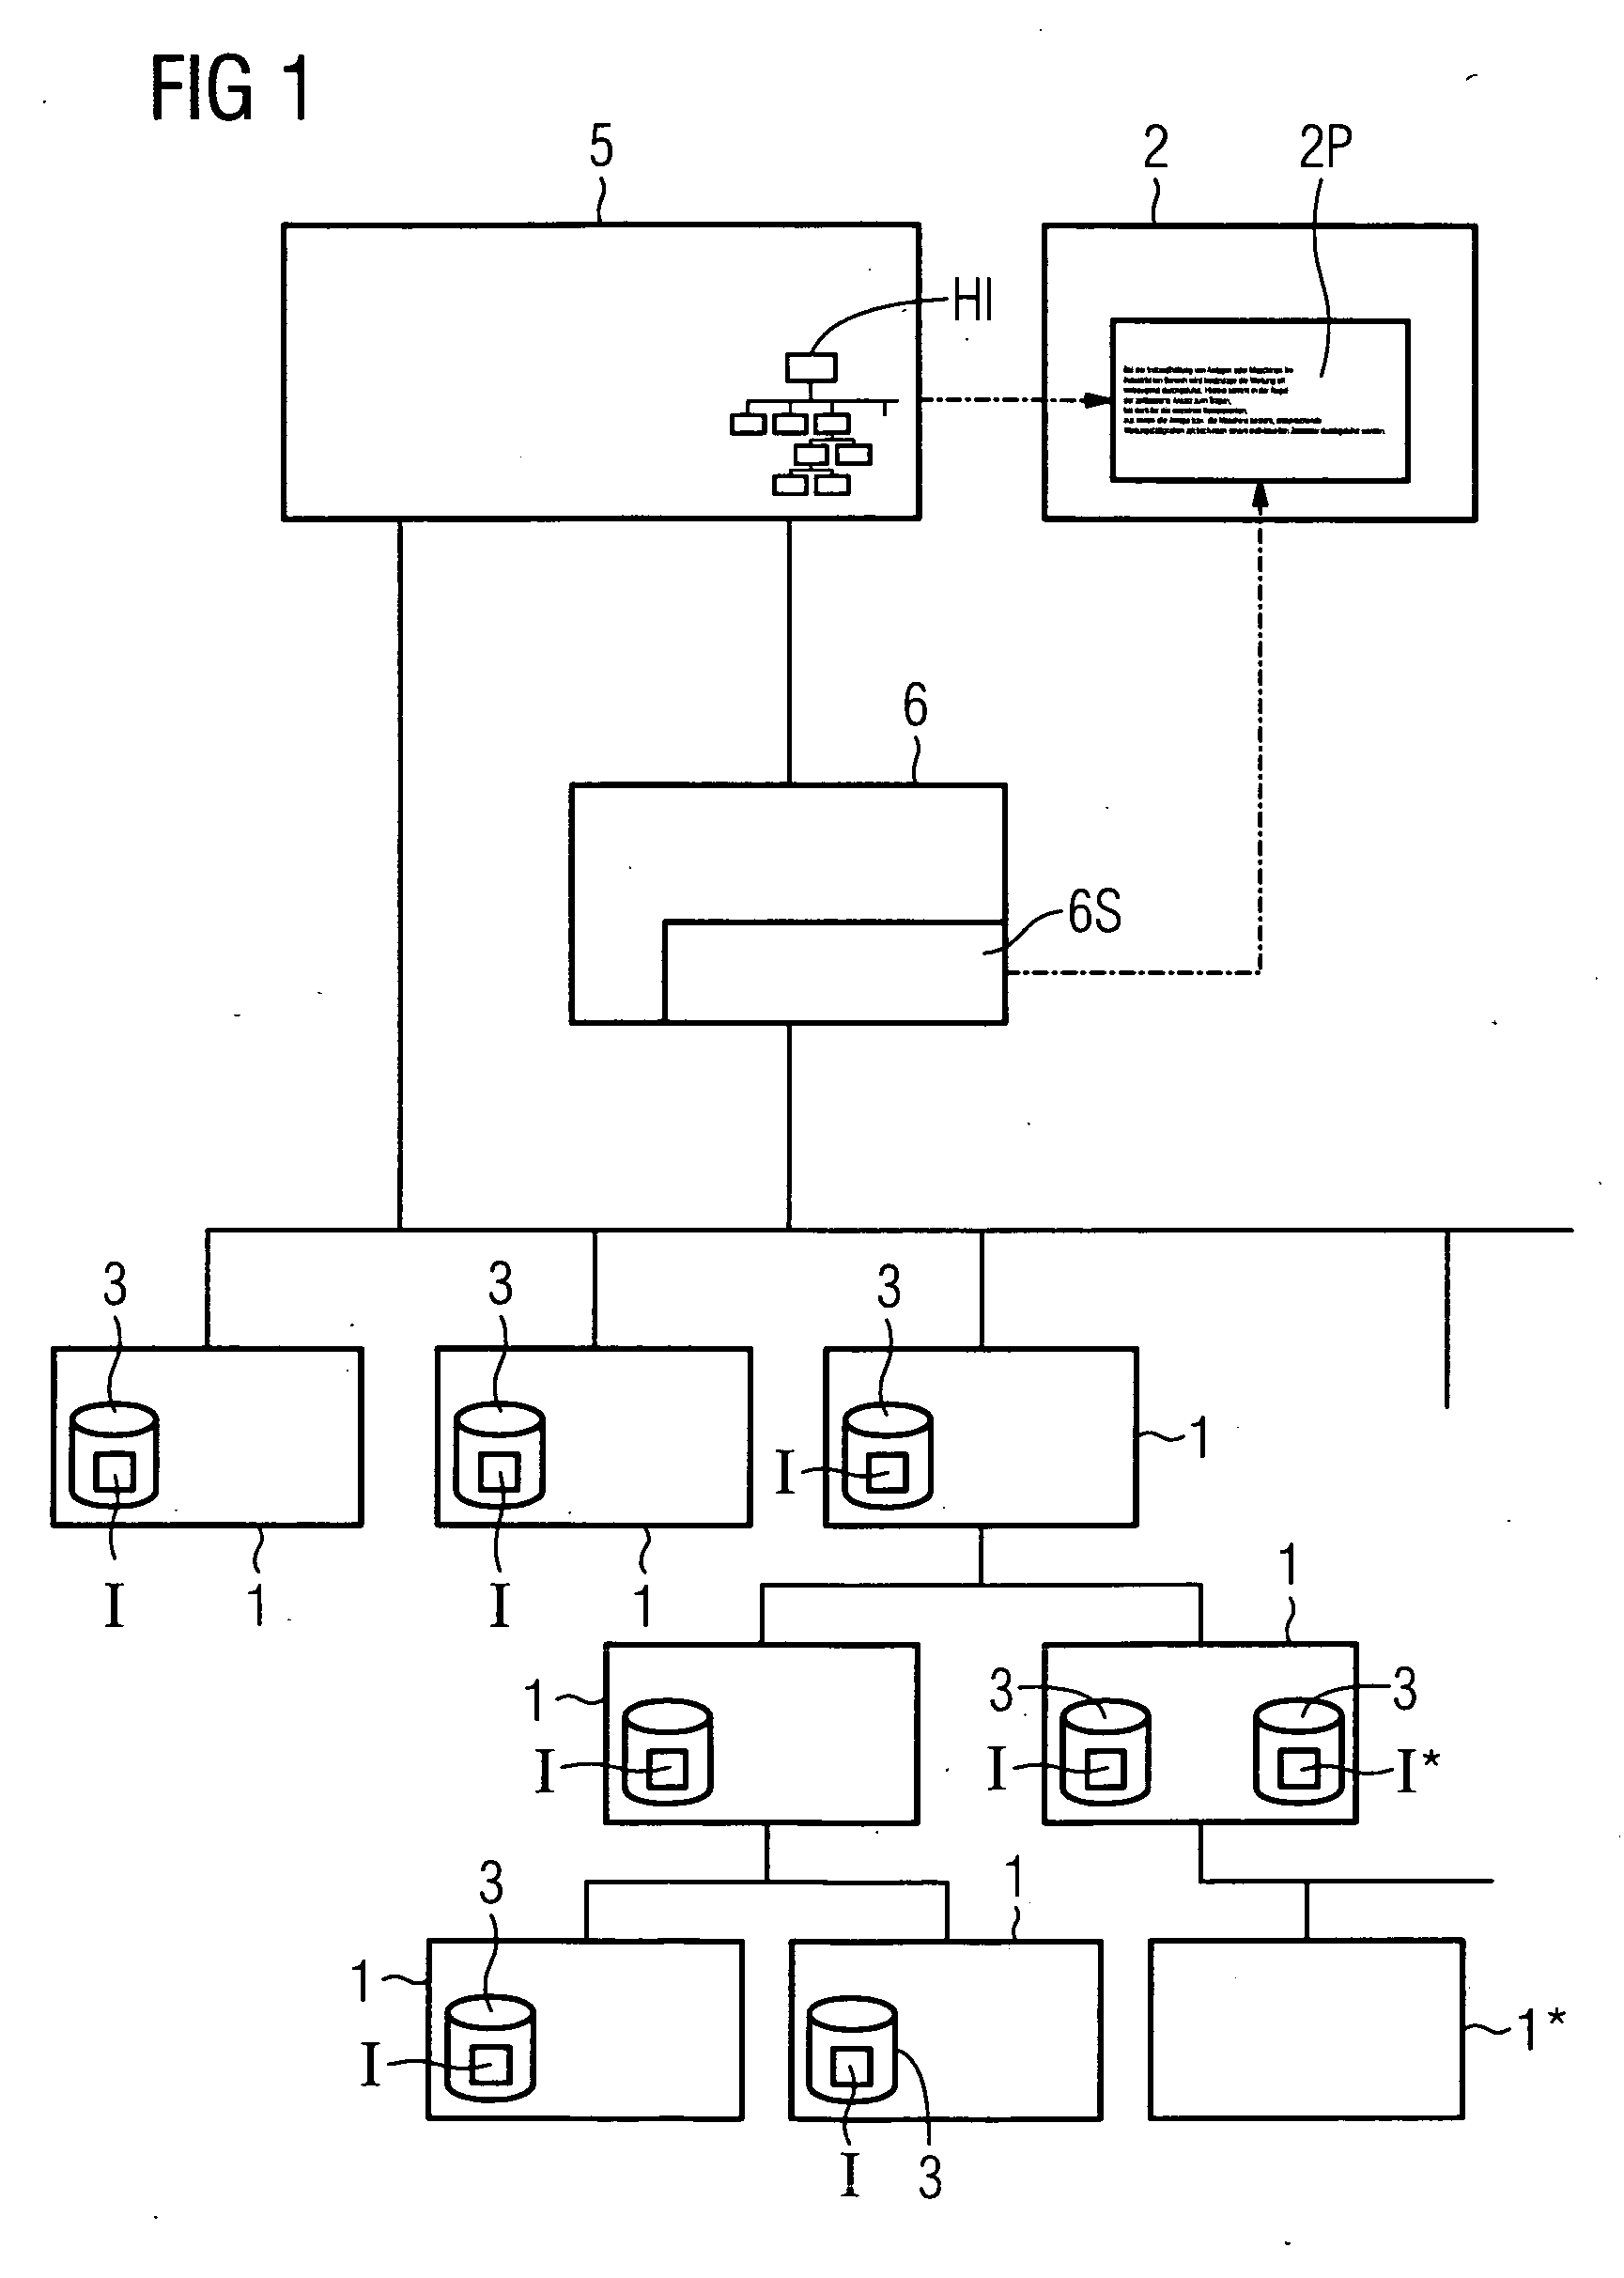 System for creating maintenance plans